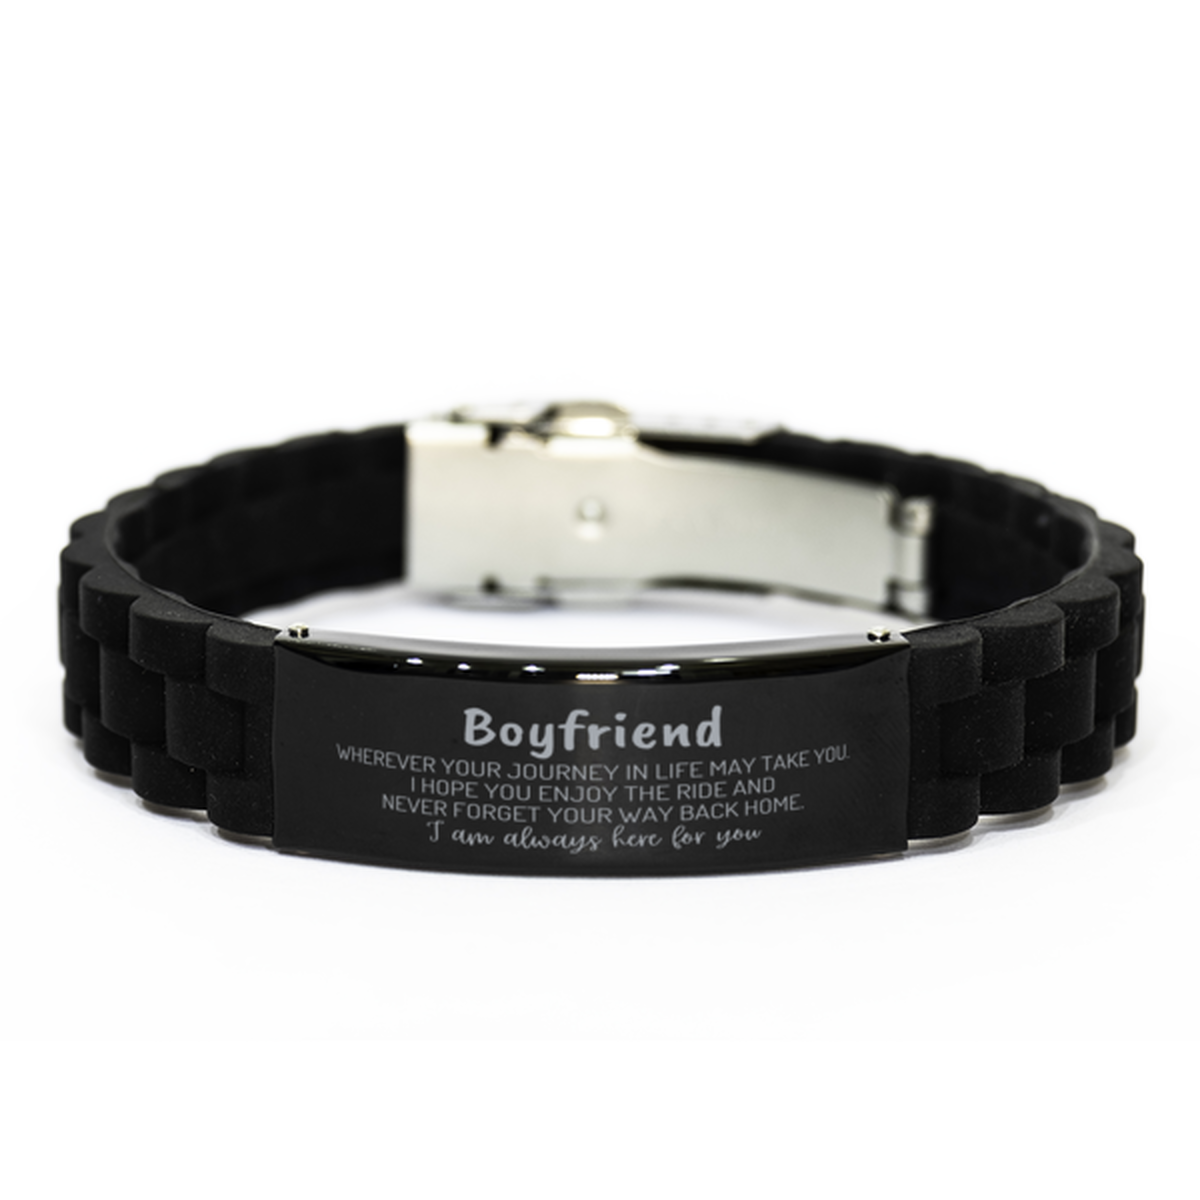 Boyfriend wherever your journey in life may take you, I am always here for you Boyfriend Black Glidelock Clasp Bracelet, Awesome Christmas Gifts For Boyfriend, Boyfriend Birthday Gifts for Men Women Family Loved One